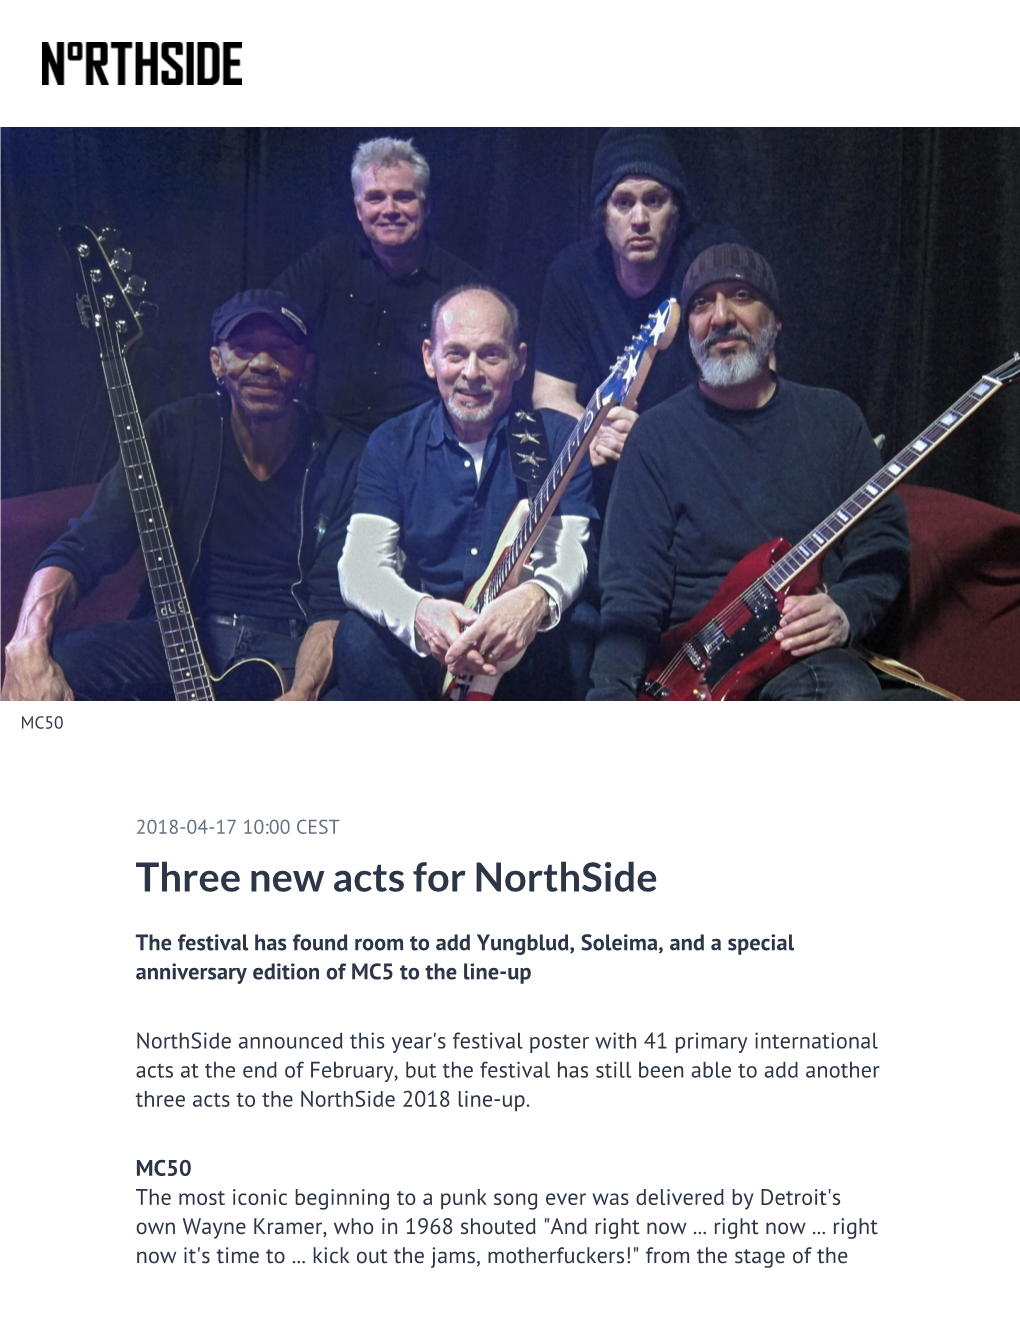 Three New Acts for Northside